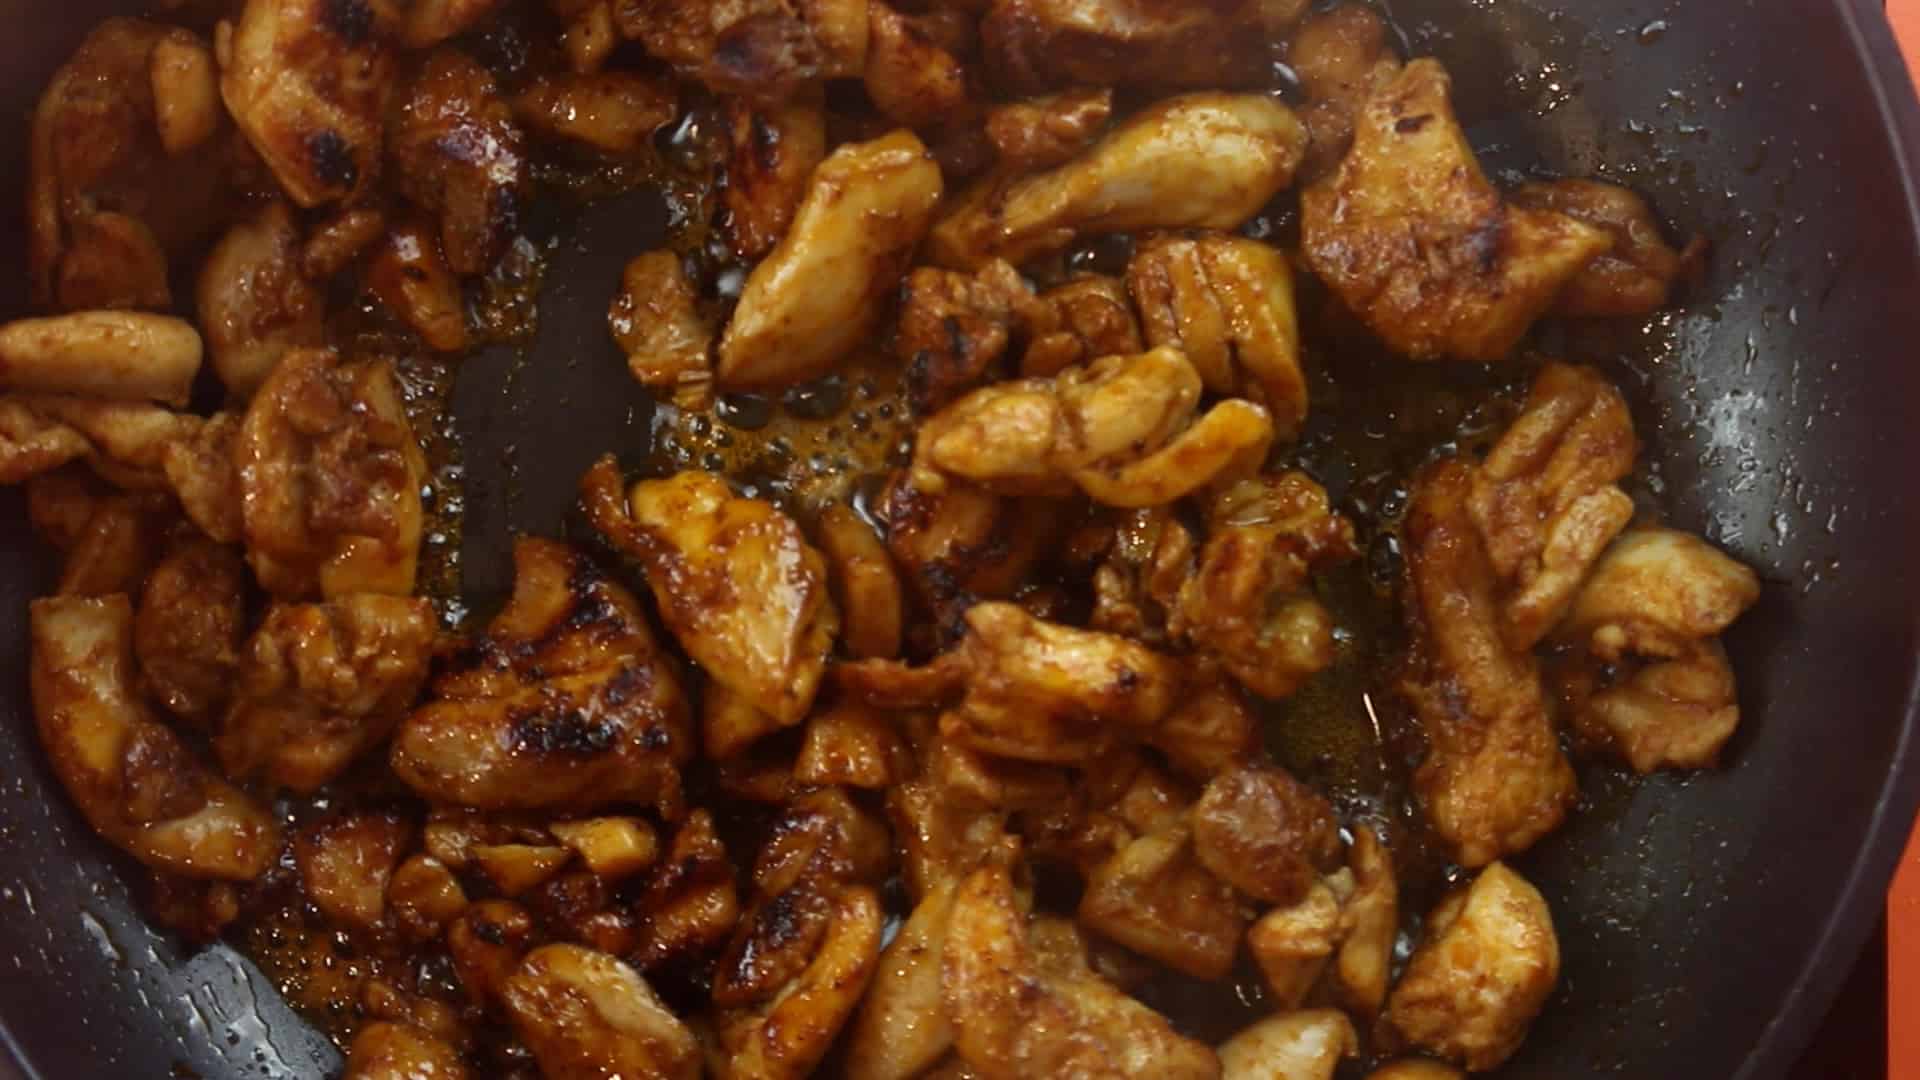 Browned and cooked chicken pieces in a pan on stove.